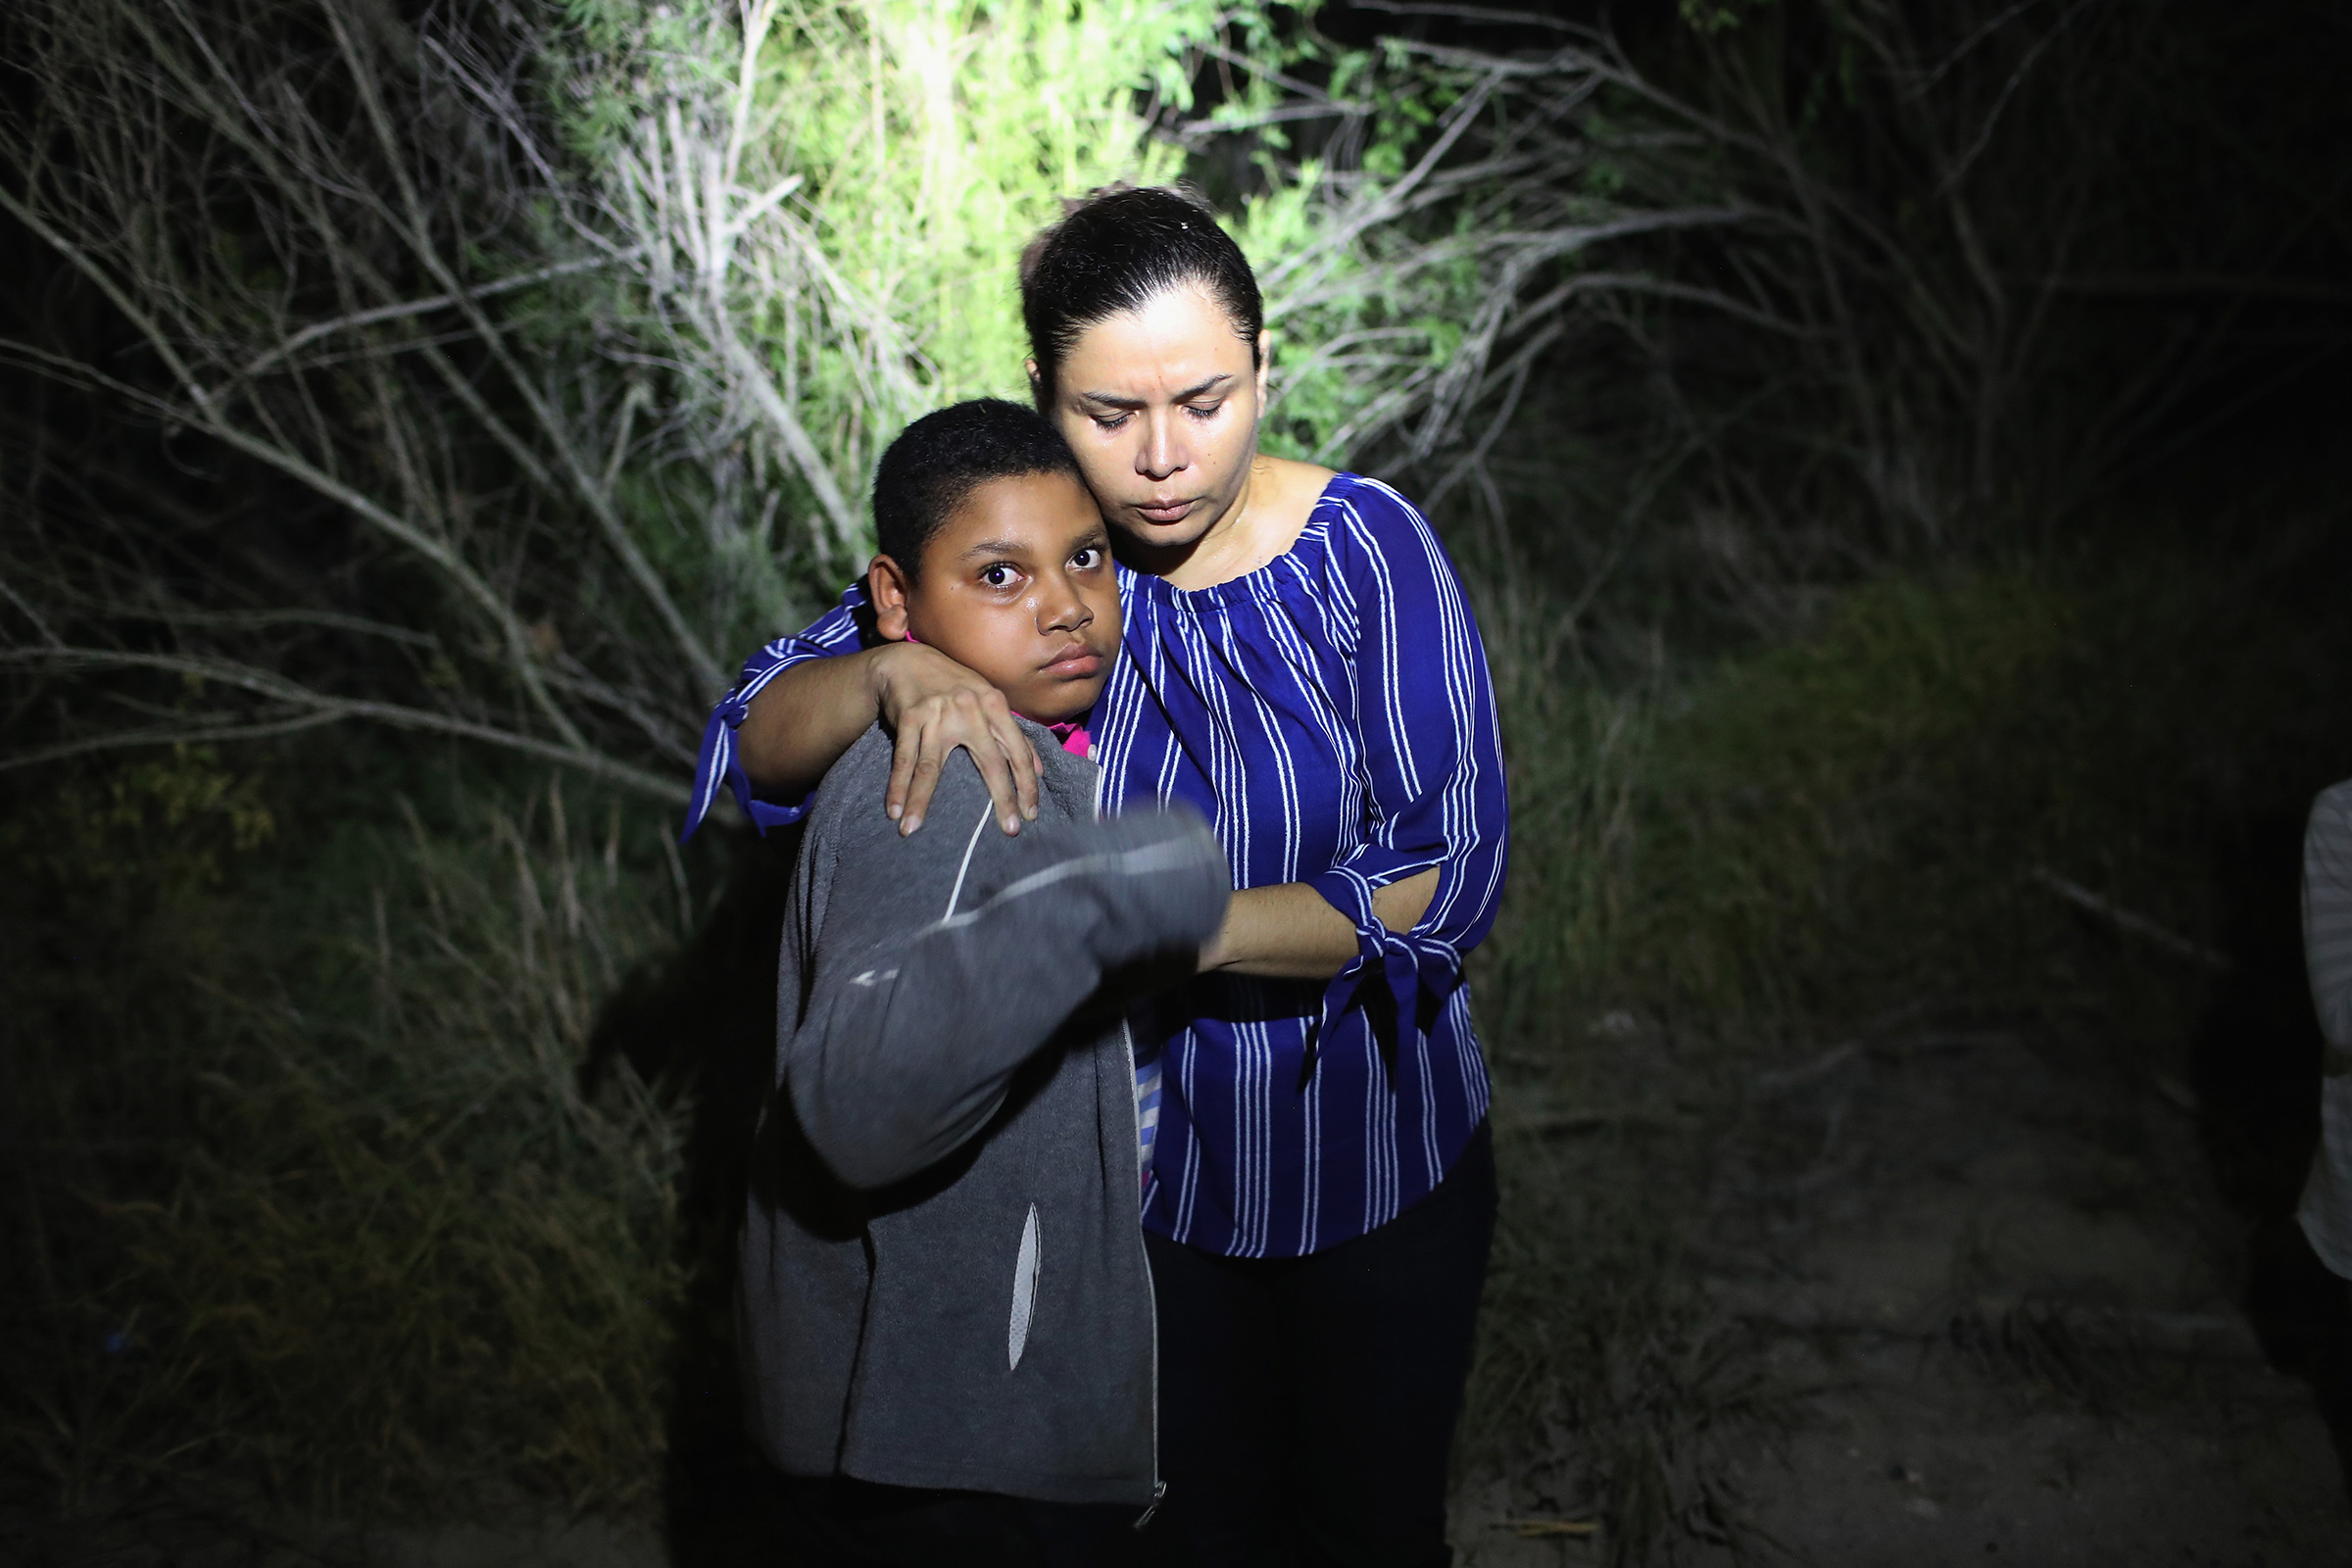 A U.S. Border Patrol spotlight shines on a mother and son from Honduras as they are found in the dark near the U.S.-Mexico border in McAllen, Texas on June 12, 2018. The asylum seekers were then detained by Border Patrol agents and then sent to a processing center for possible separation as part of the Trump Administration's "zero tolerance" policy towards undocumented immigrants. (John Moore—Getty Images)